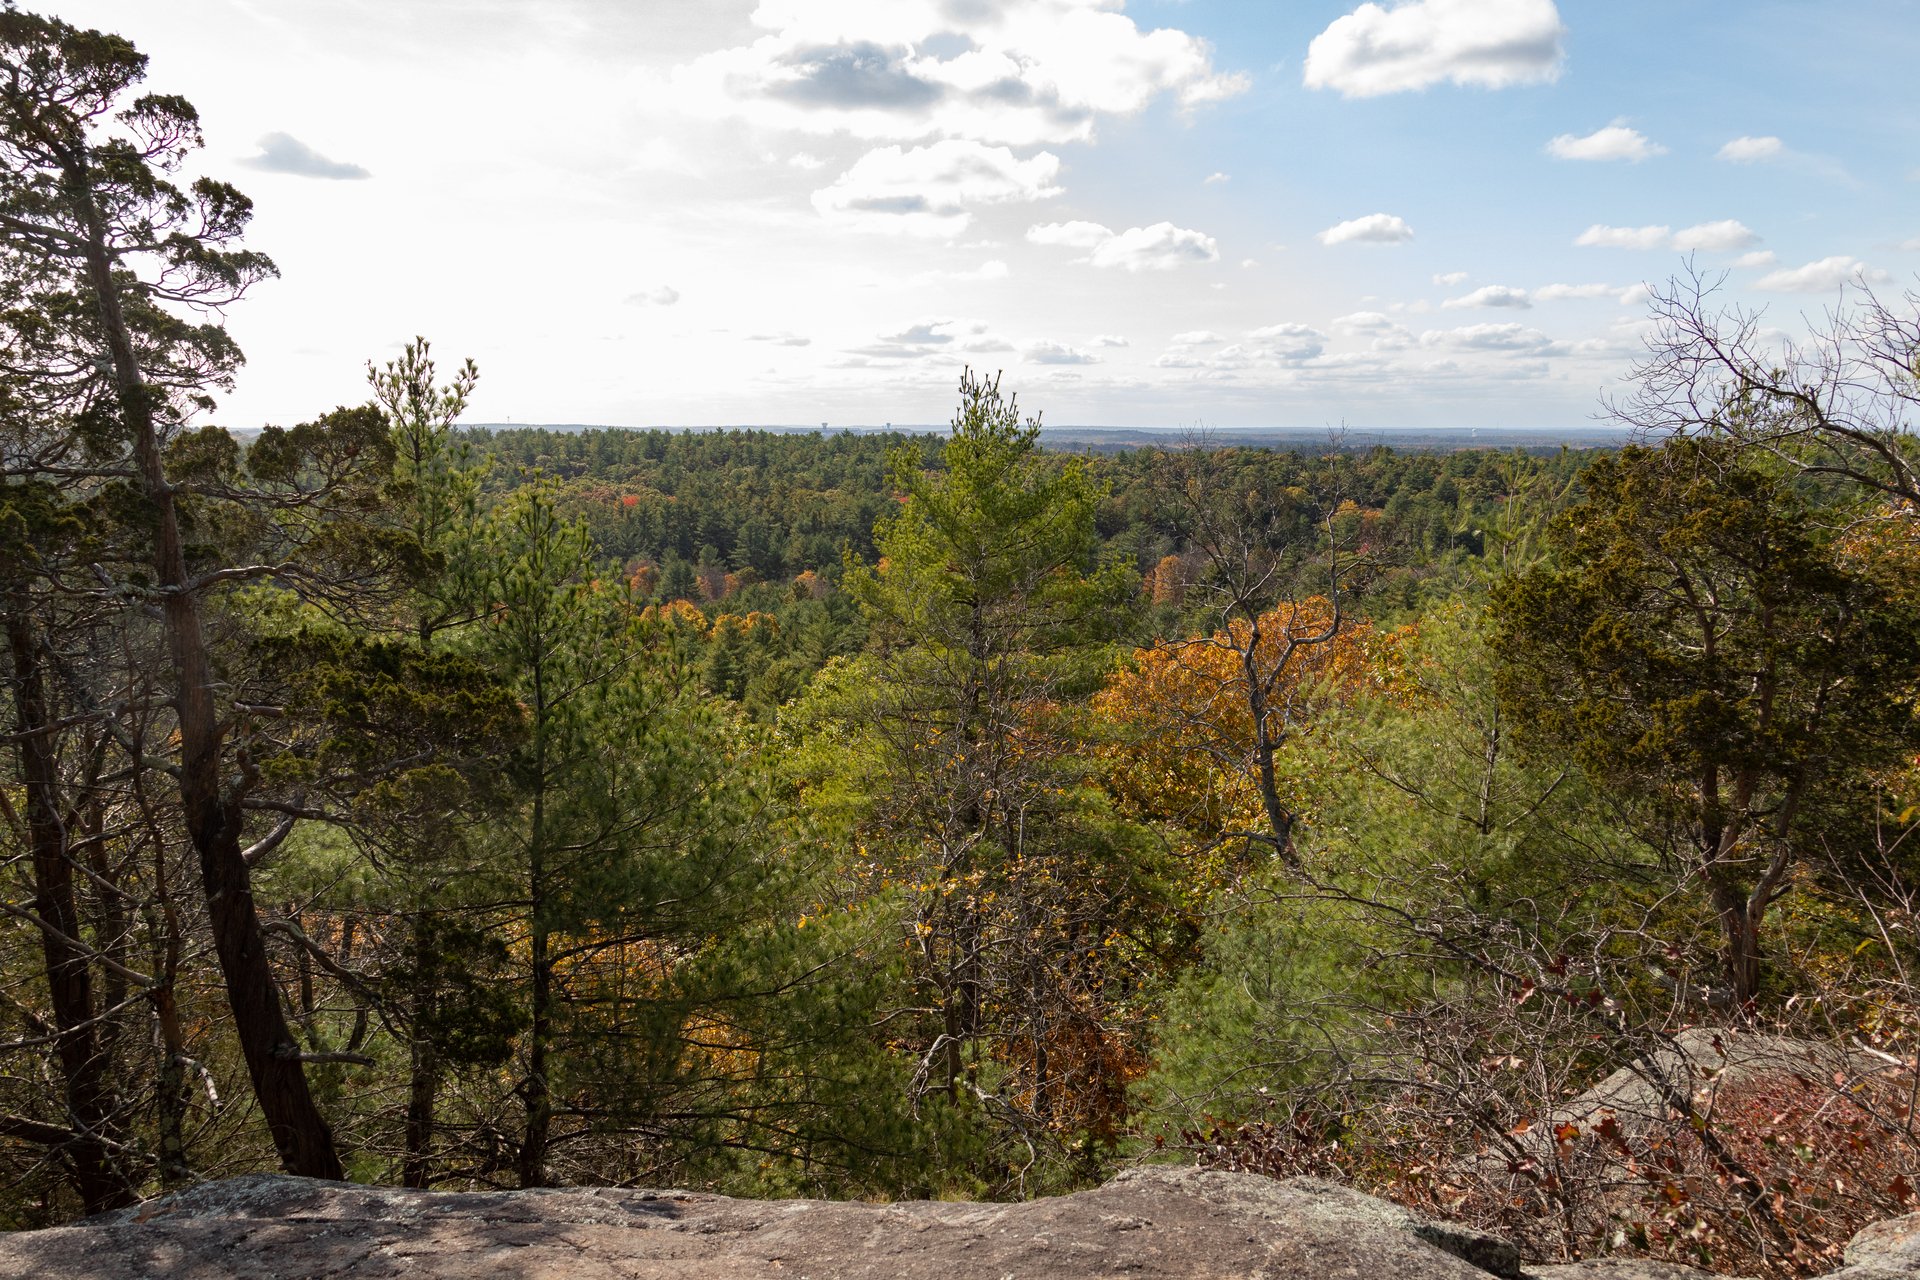 A rocky ledge overlooking a forest overview.